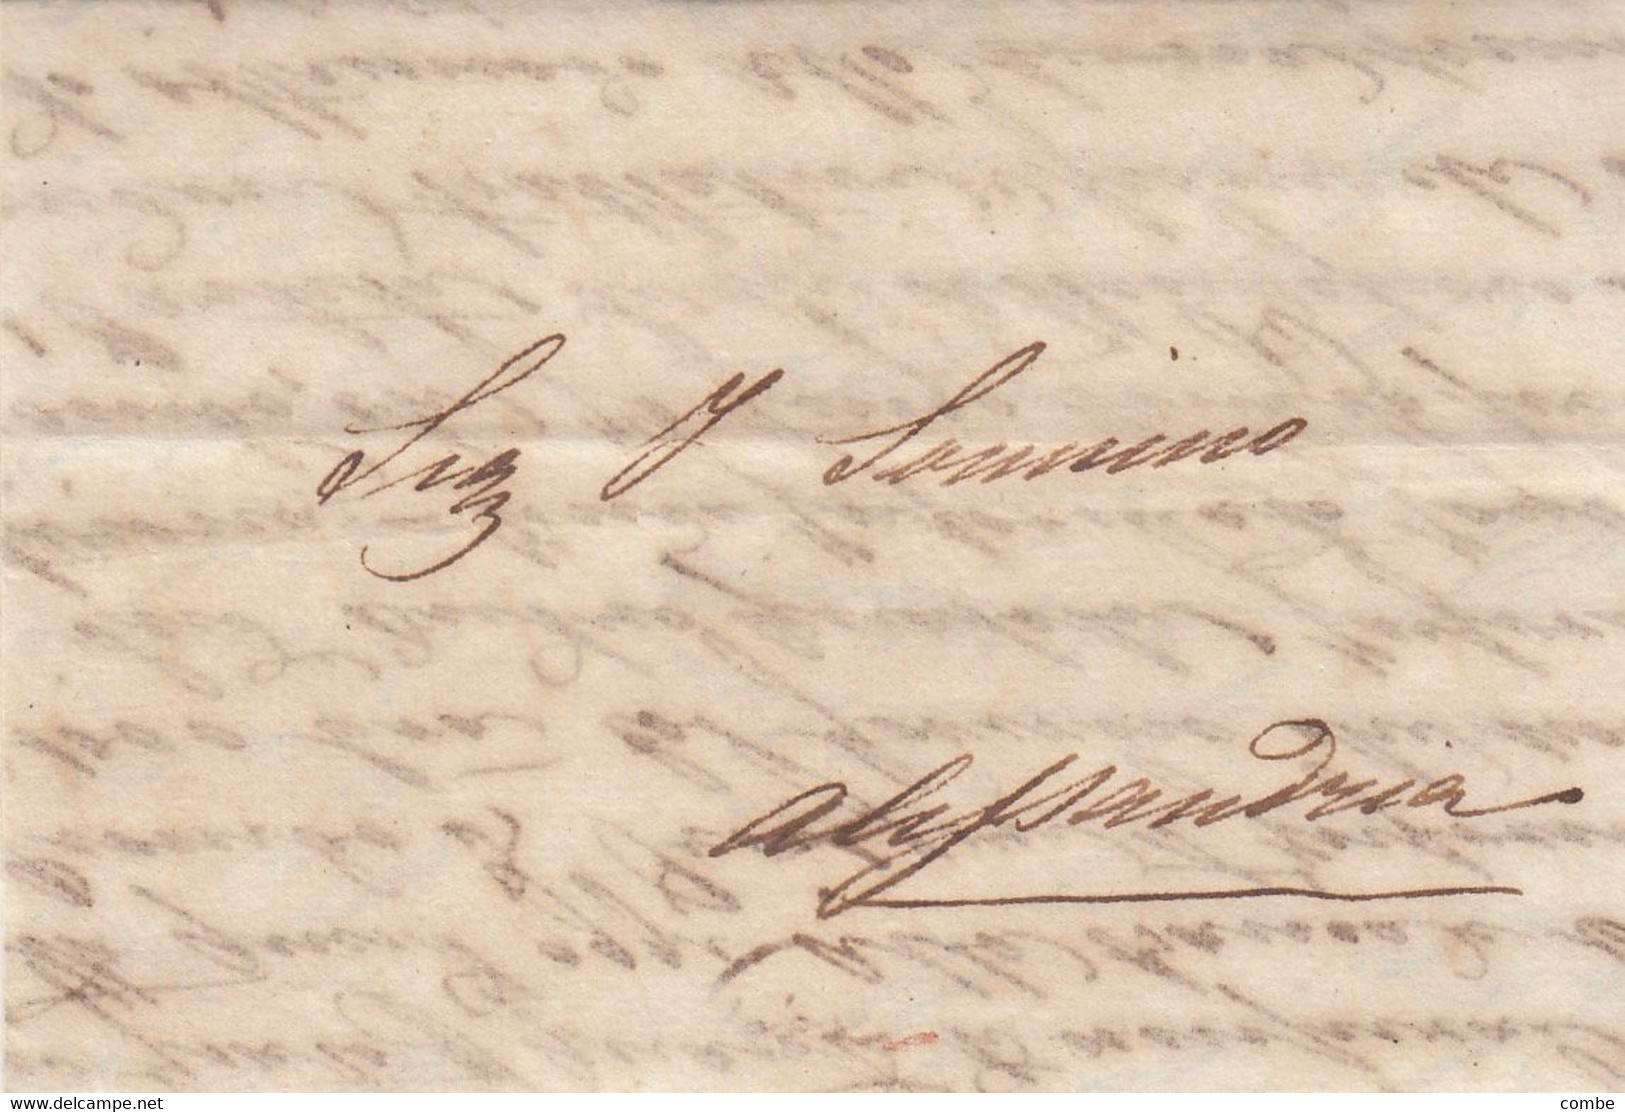 OLD LETTER. EGYPT.  1837. CAIRO TO J. SONNINO, ALESSANDRIA. TEXT IN ITALIAN - Voorfilatelie